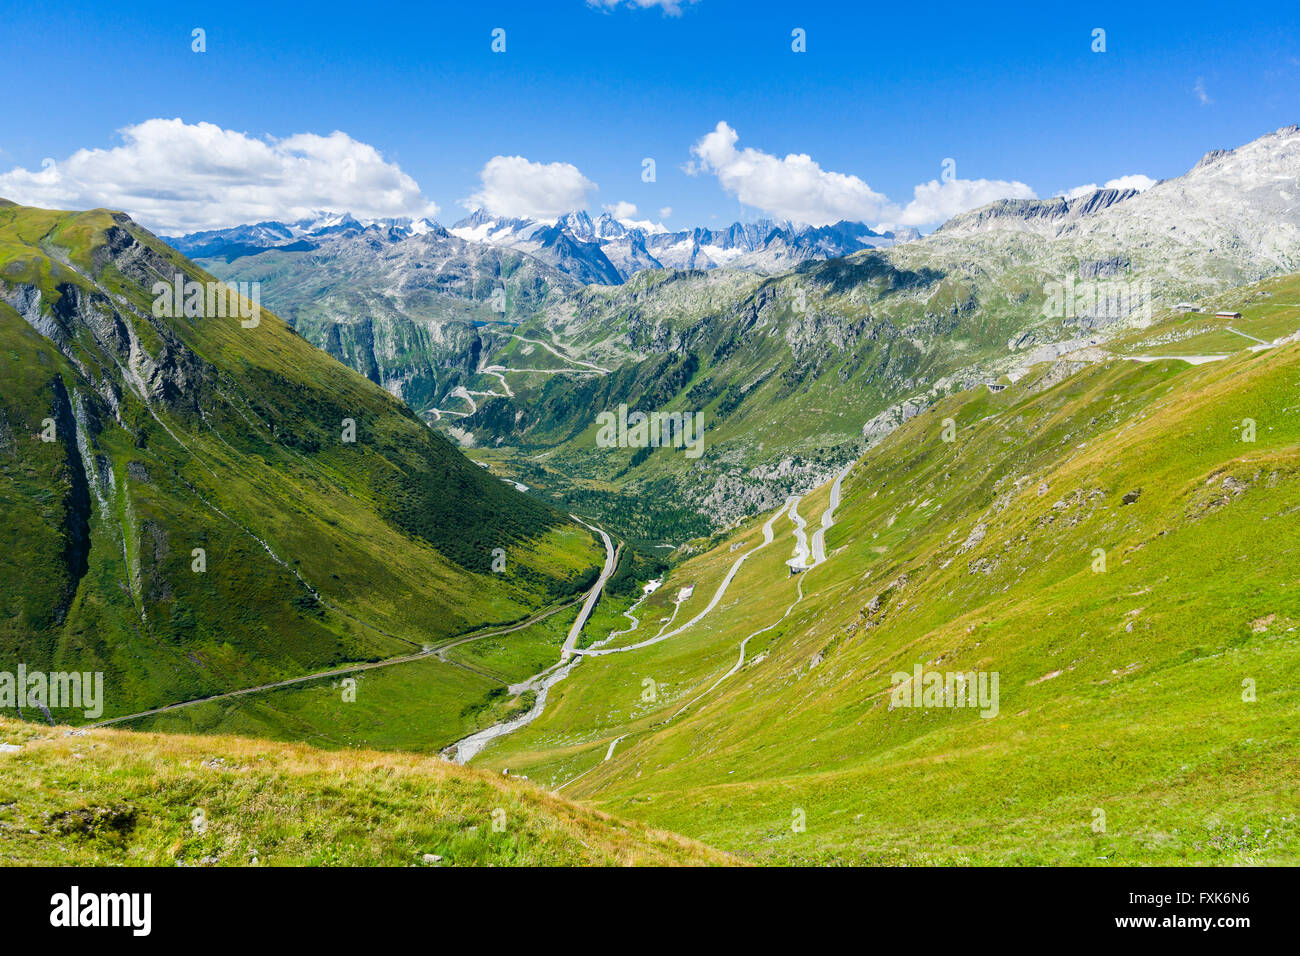 Road leading to Furka Pass winding up a green mountain slope, high mountains in the distance, Andermatt, Uri, Switzerland Stock Photo